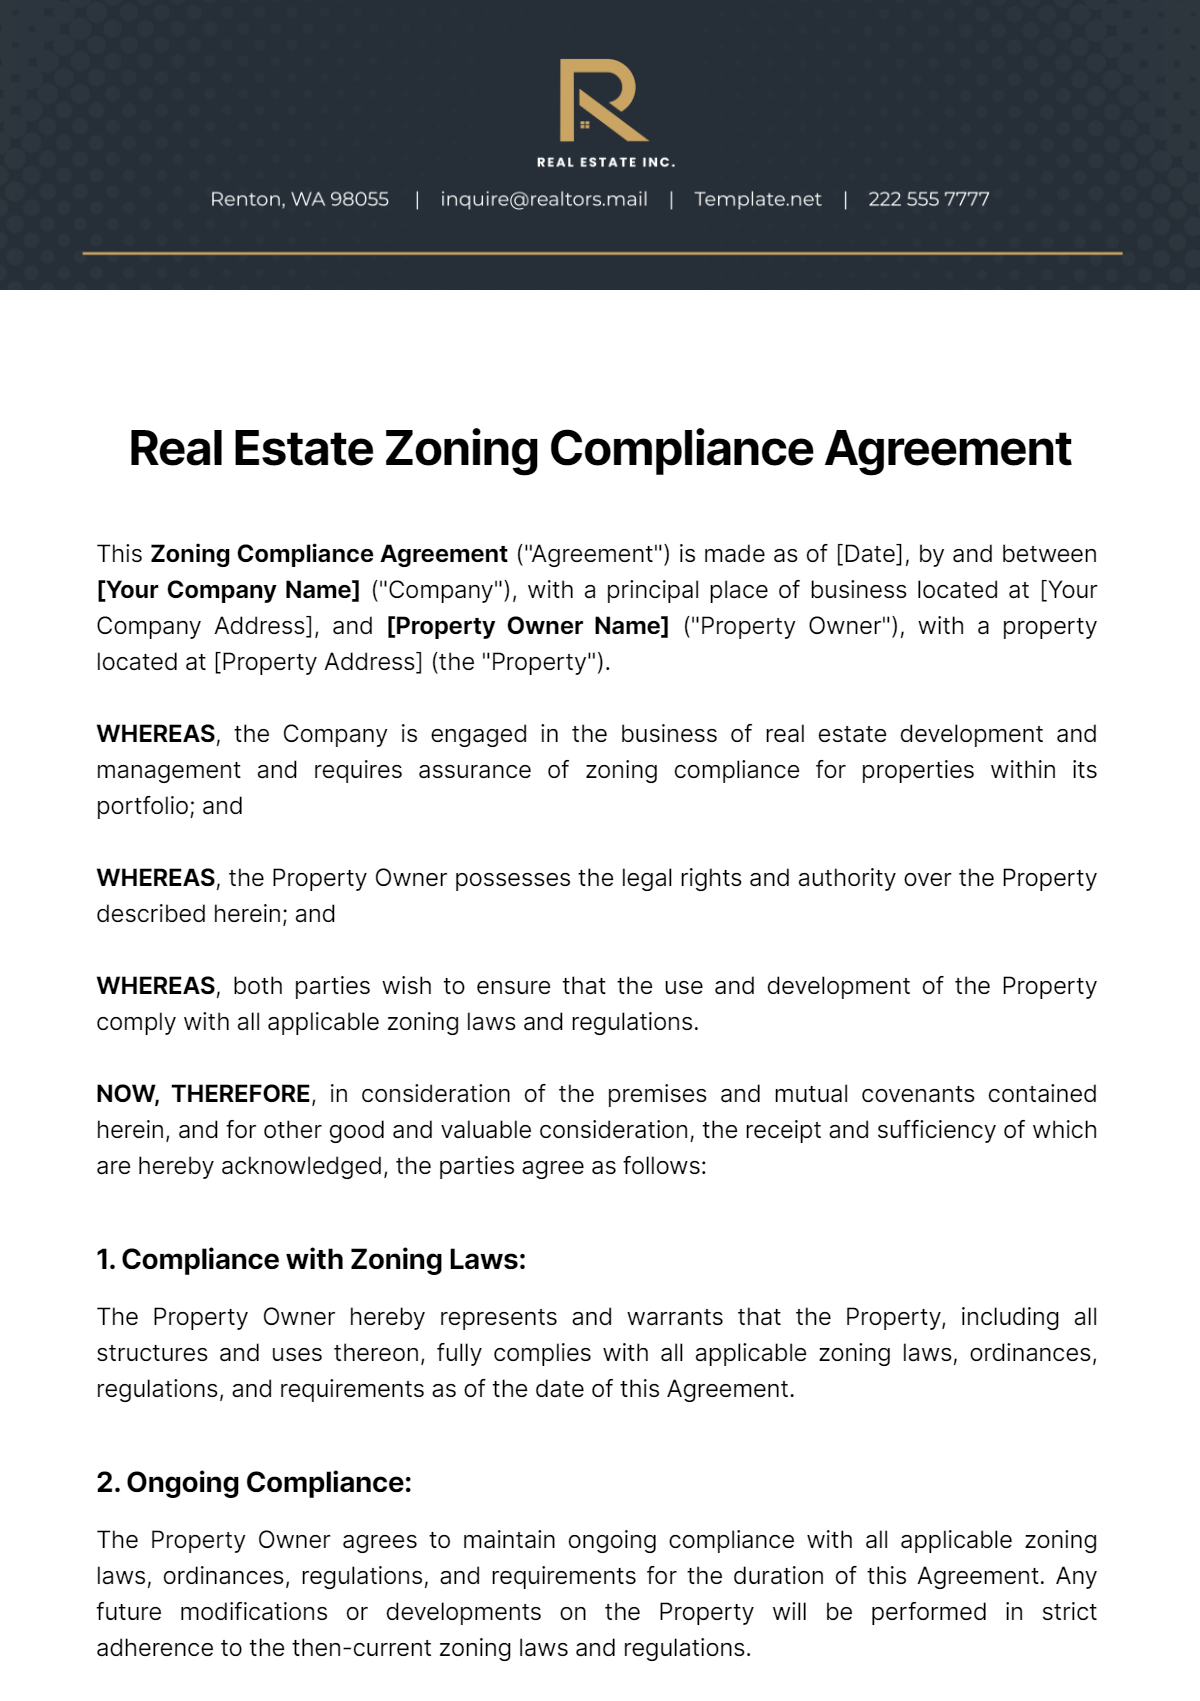 Real Estate Zoning Compliance Agreement Template